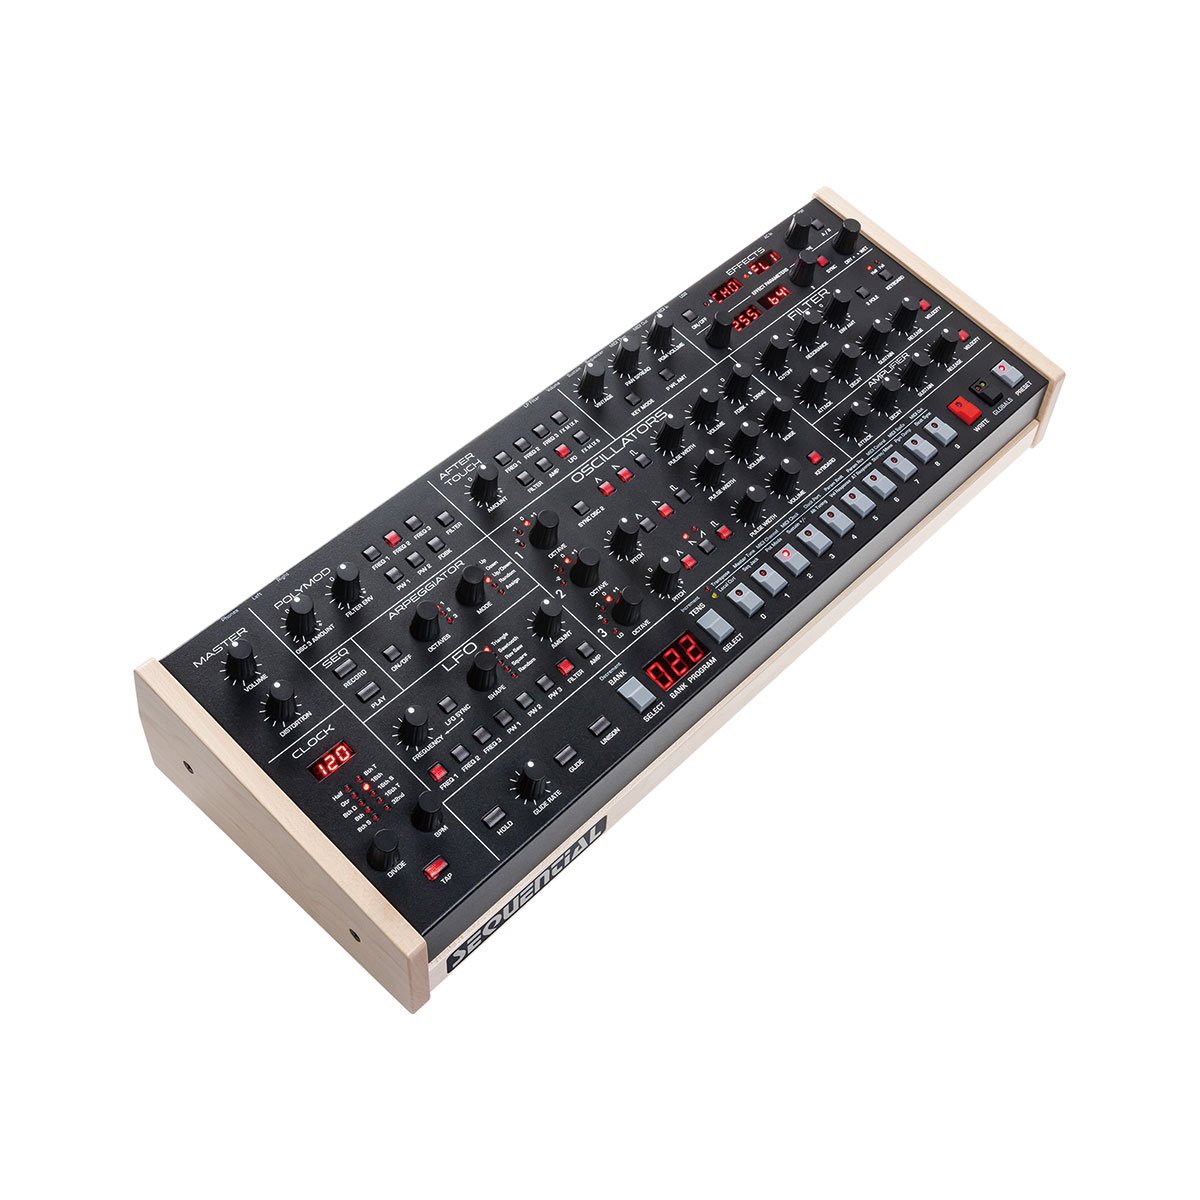 SEQUENTIAL Trigon-6 Module シンセサイザー アナログシンセサイザー Five G music technology